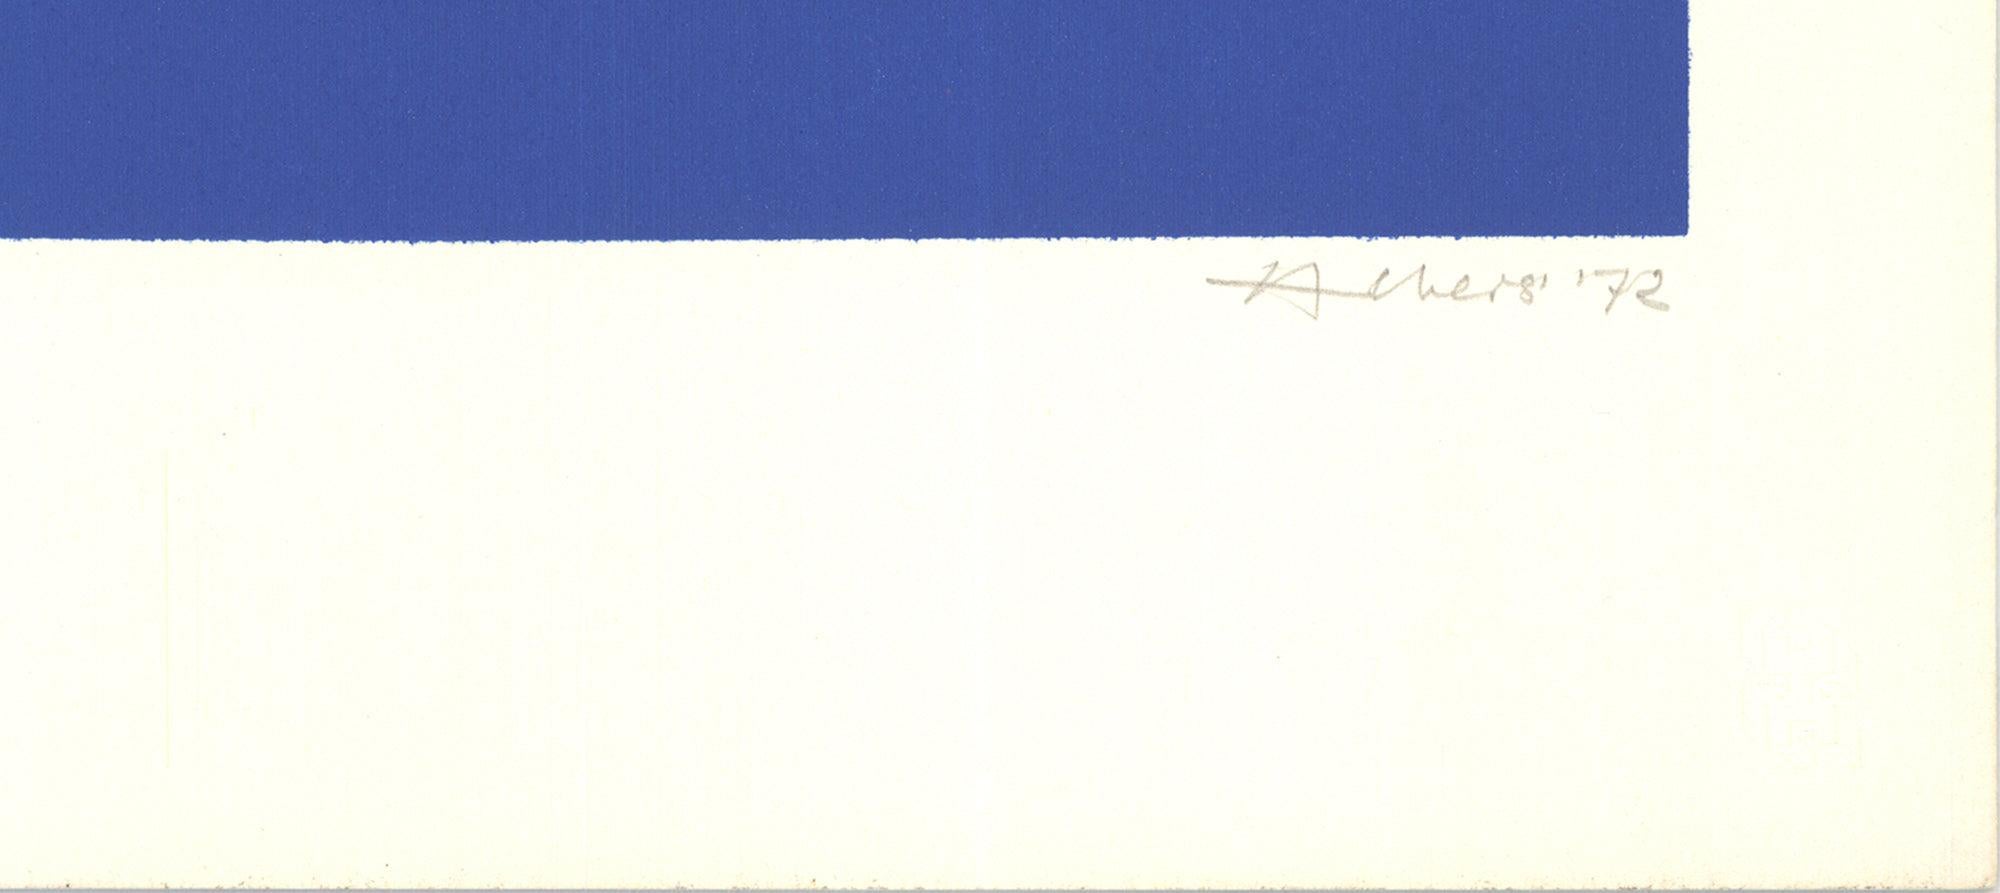 Josef Albers-The 10th New York Film Festival-HAND SIGNED, 1972 For Sale 4